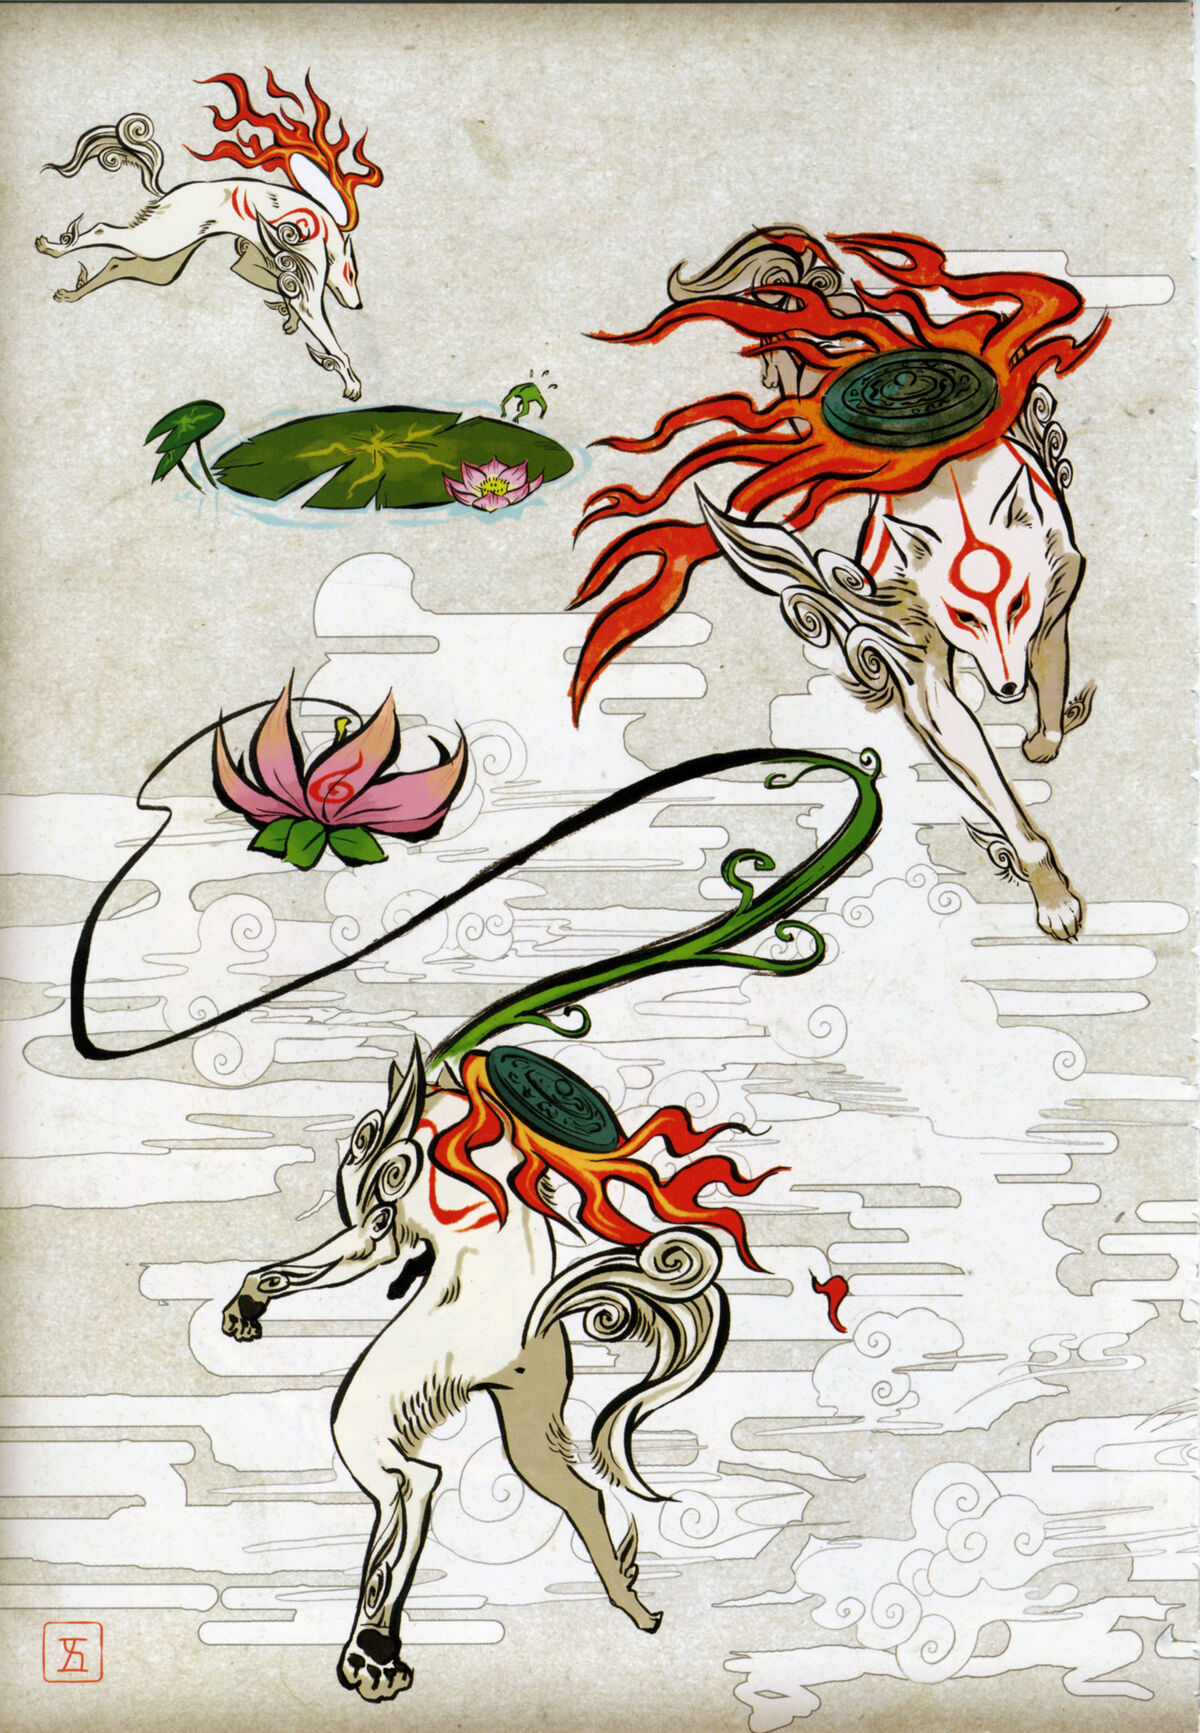 Okami Official Complete Works